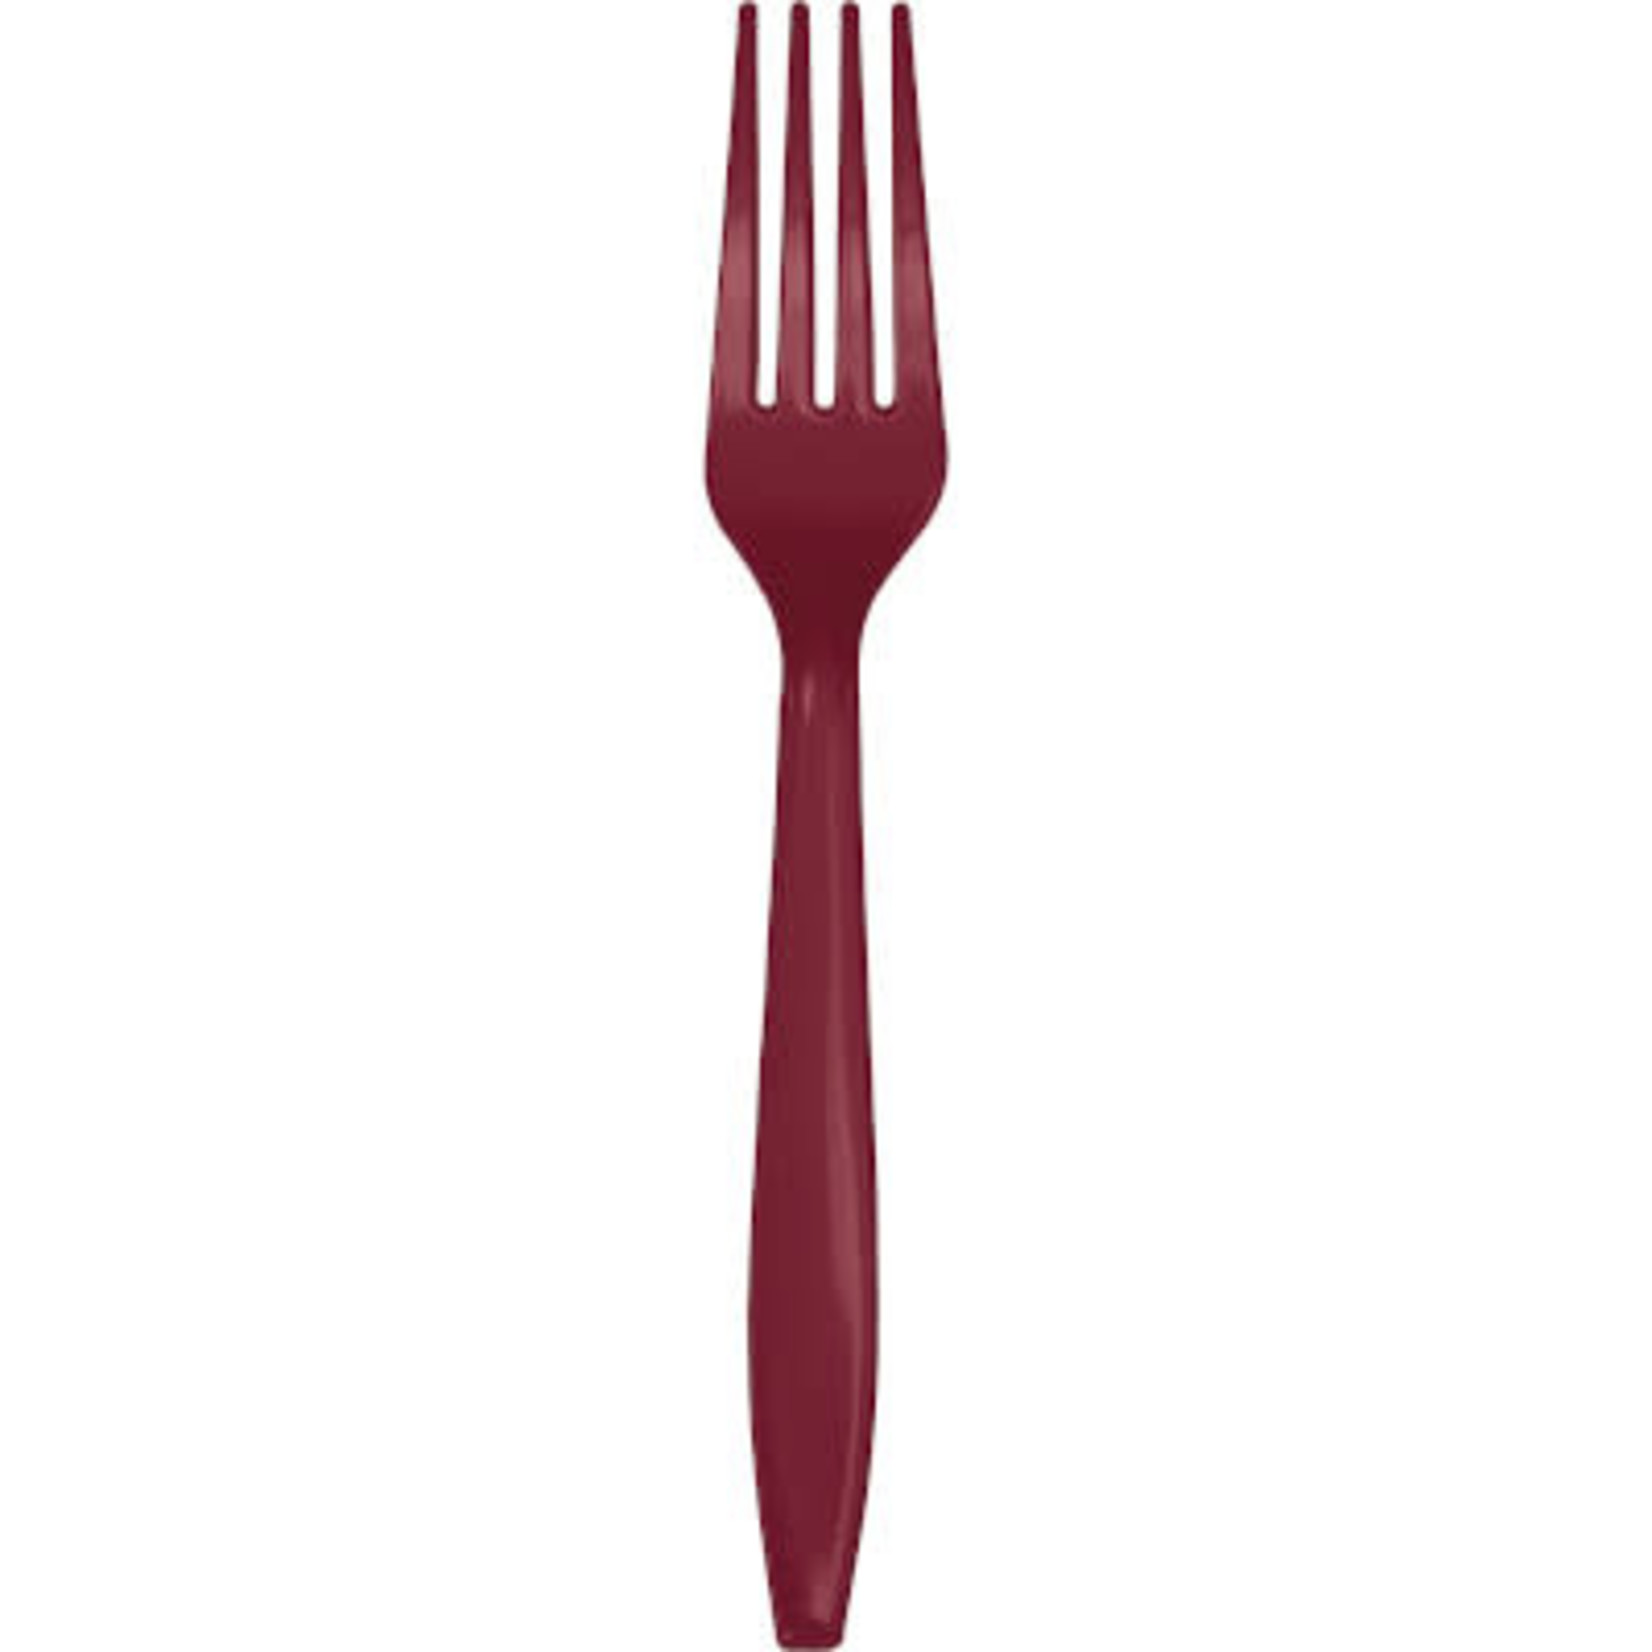 Touch of Color Burgundy Premium Plastic Forks - 24ct.